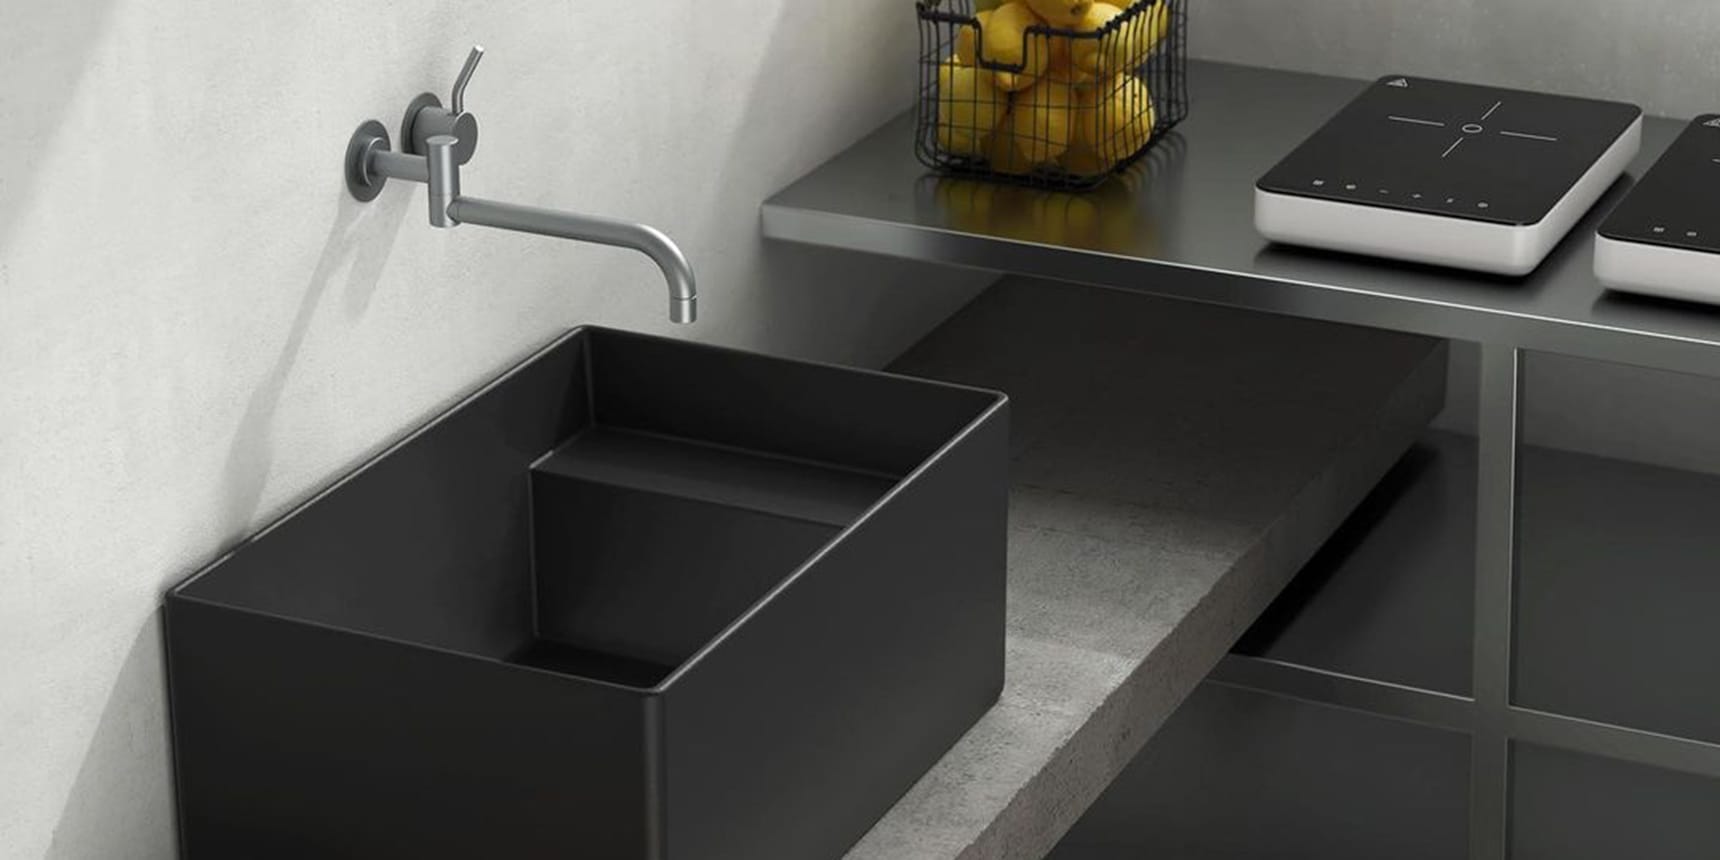 Focus around Meg11: one sink for multiple uses. Outdoor